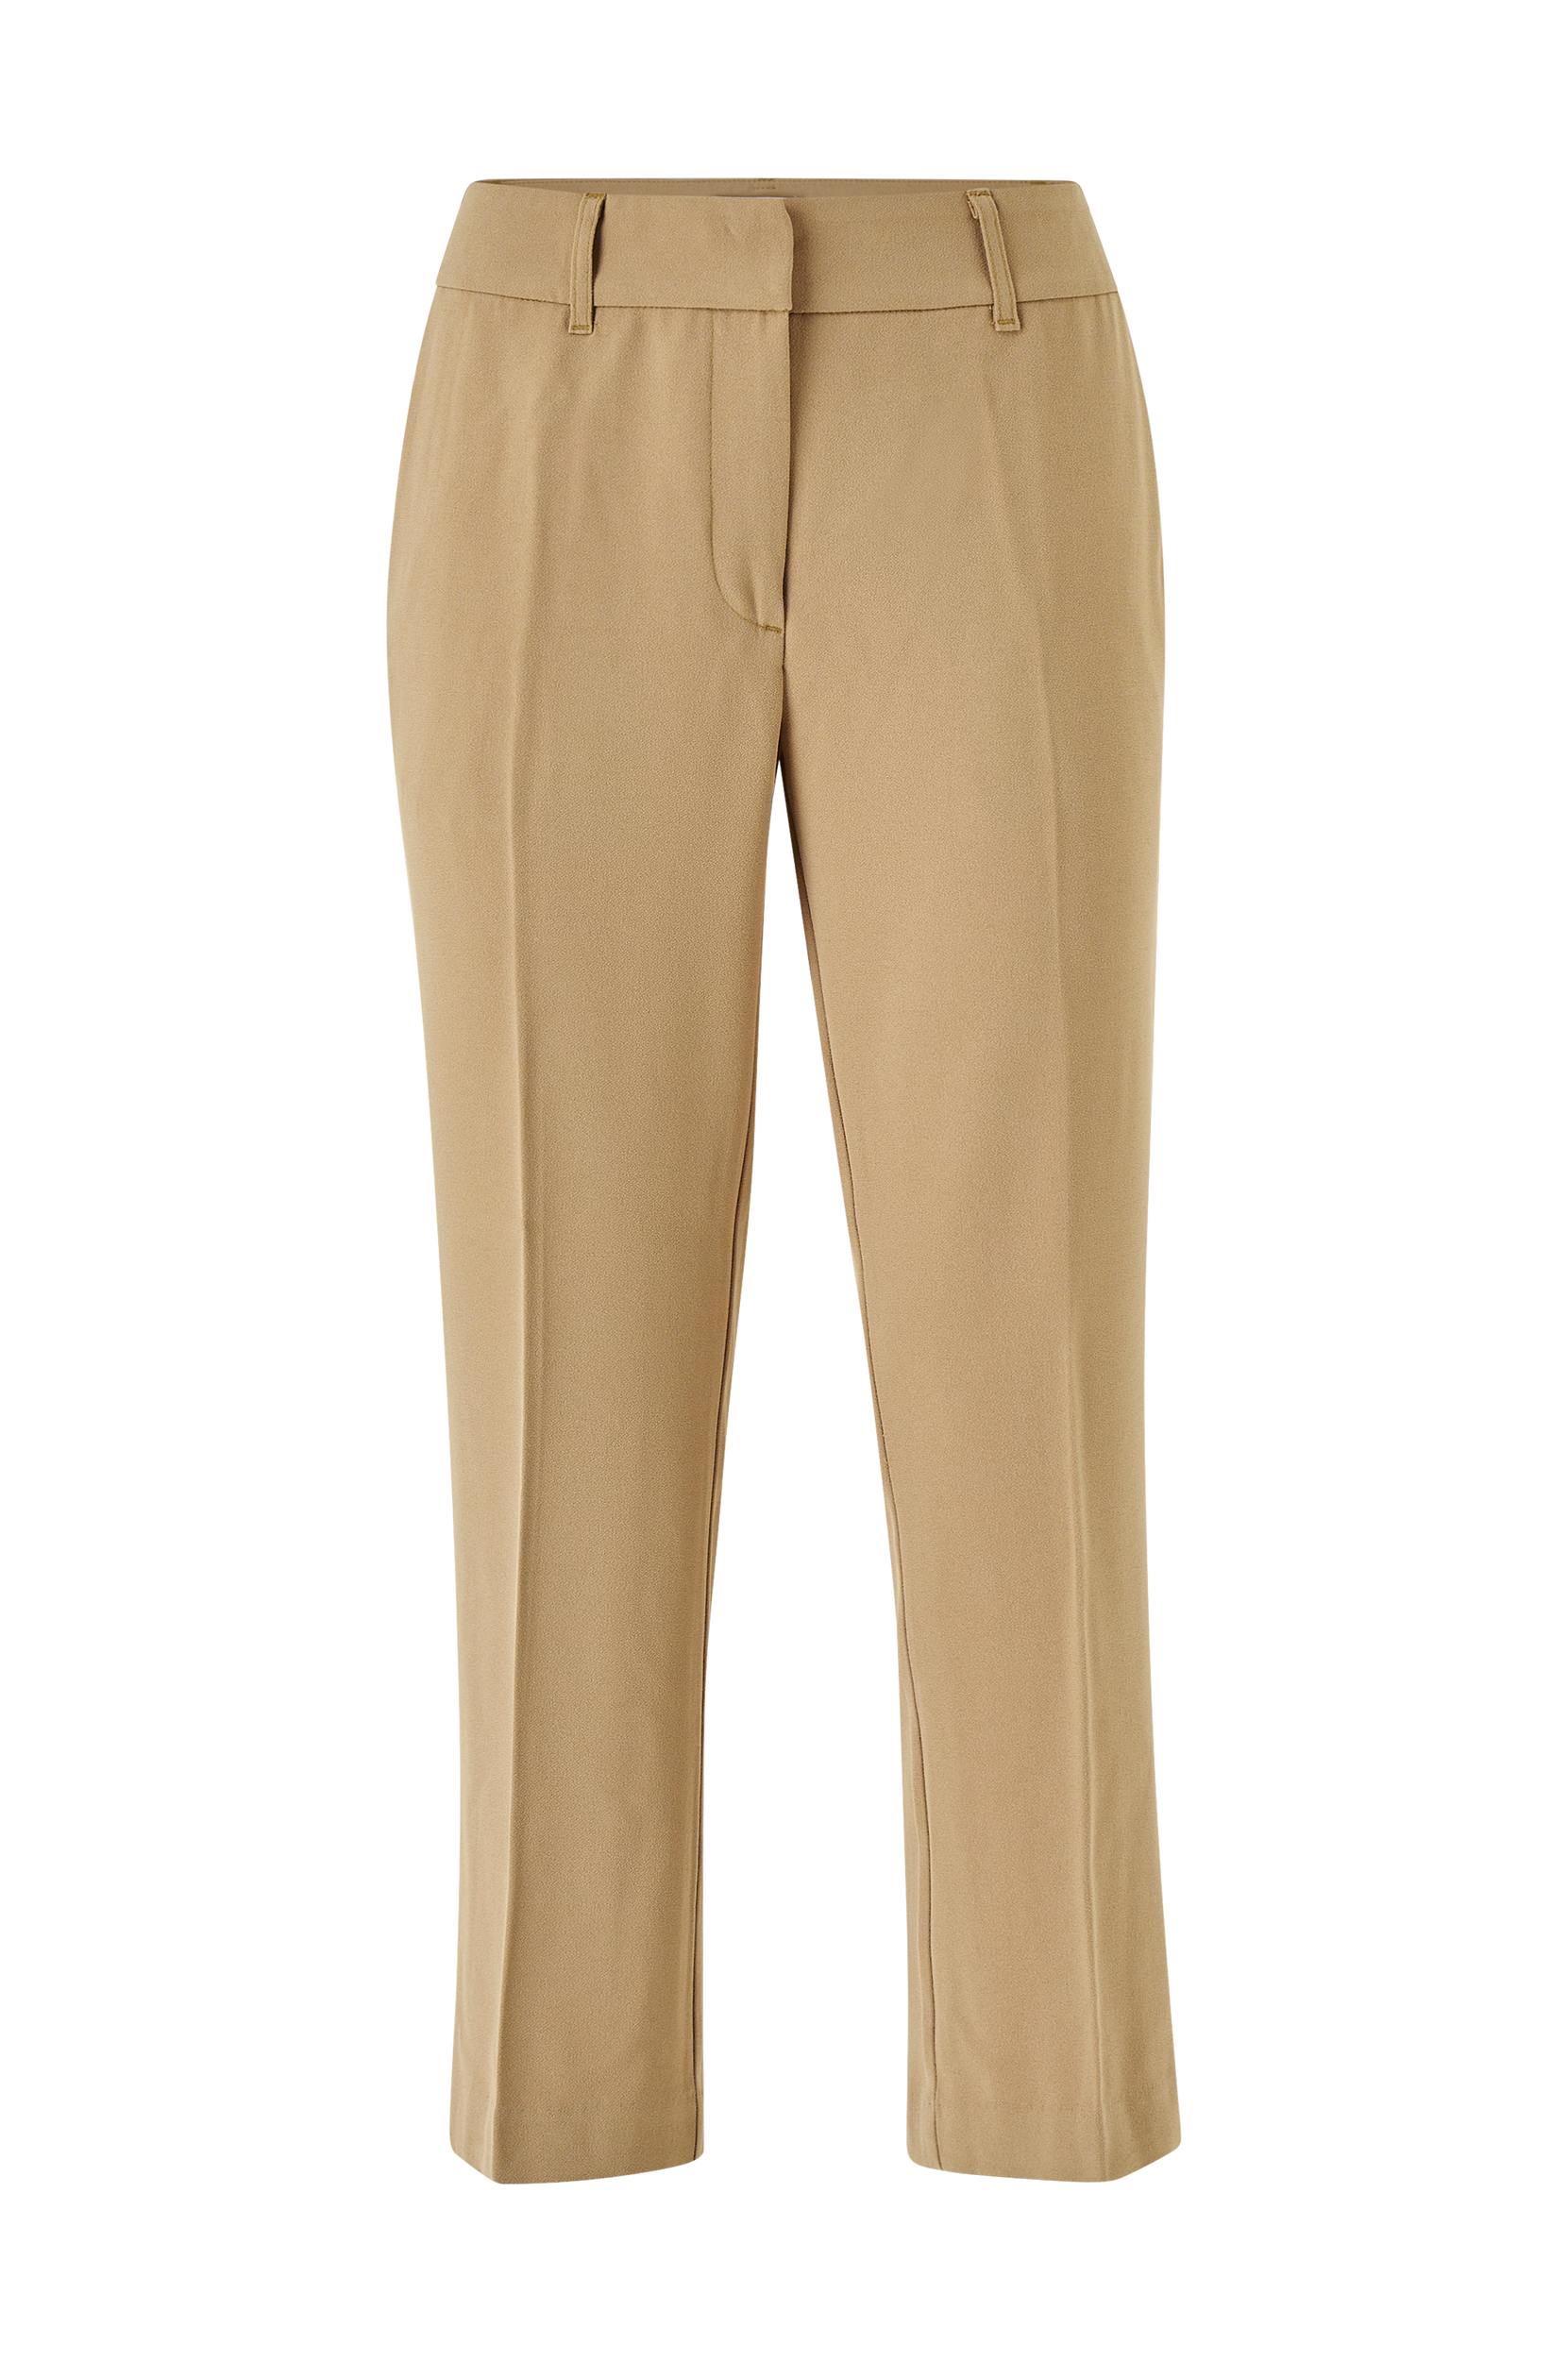 Stylein - Bukser Brydges Trousers - Natur - 38/40